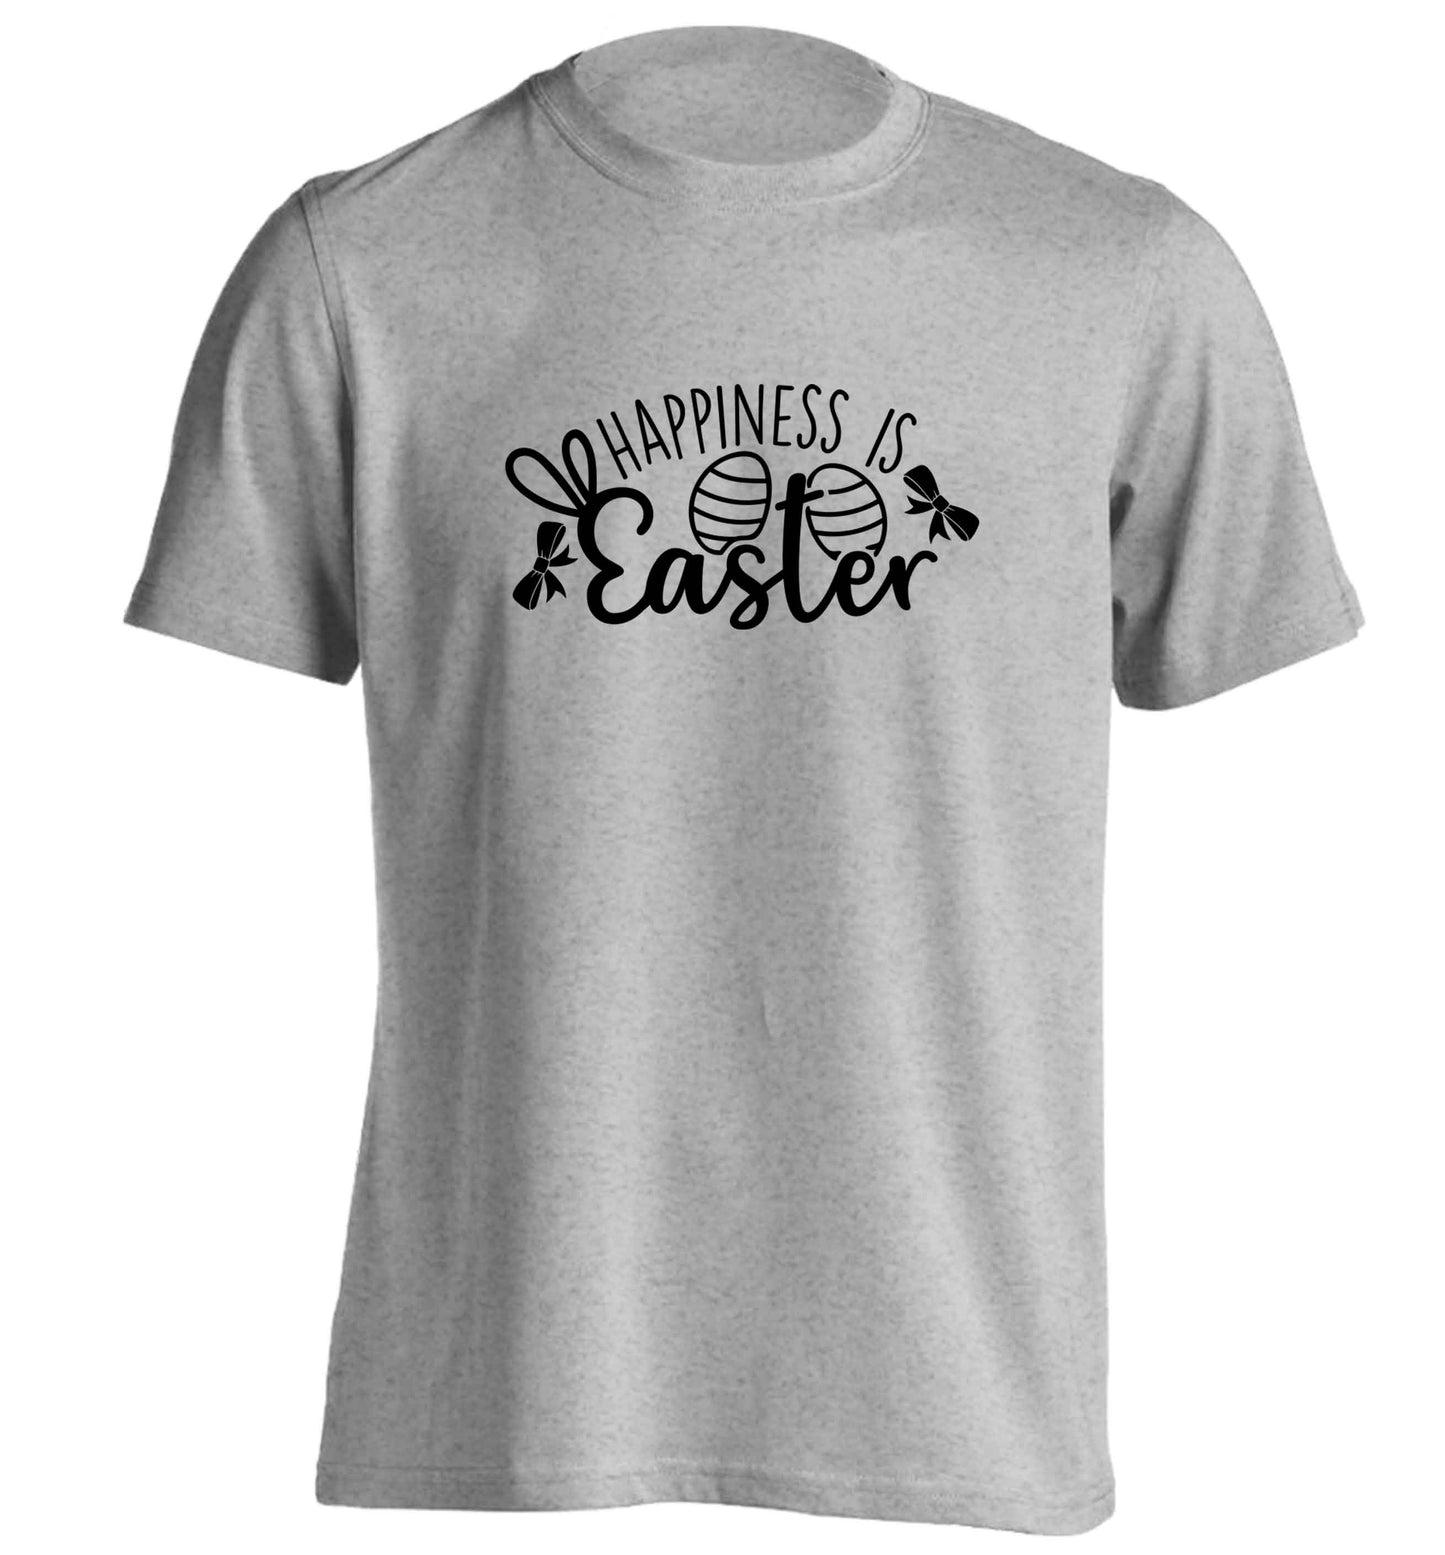 Happiness is easter adults unisex grey Tshirt 2XL